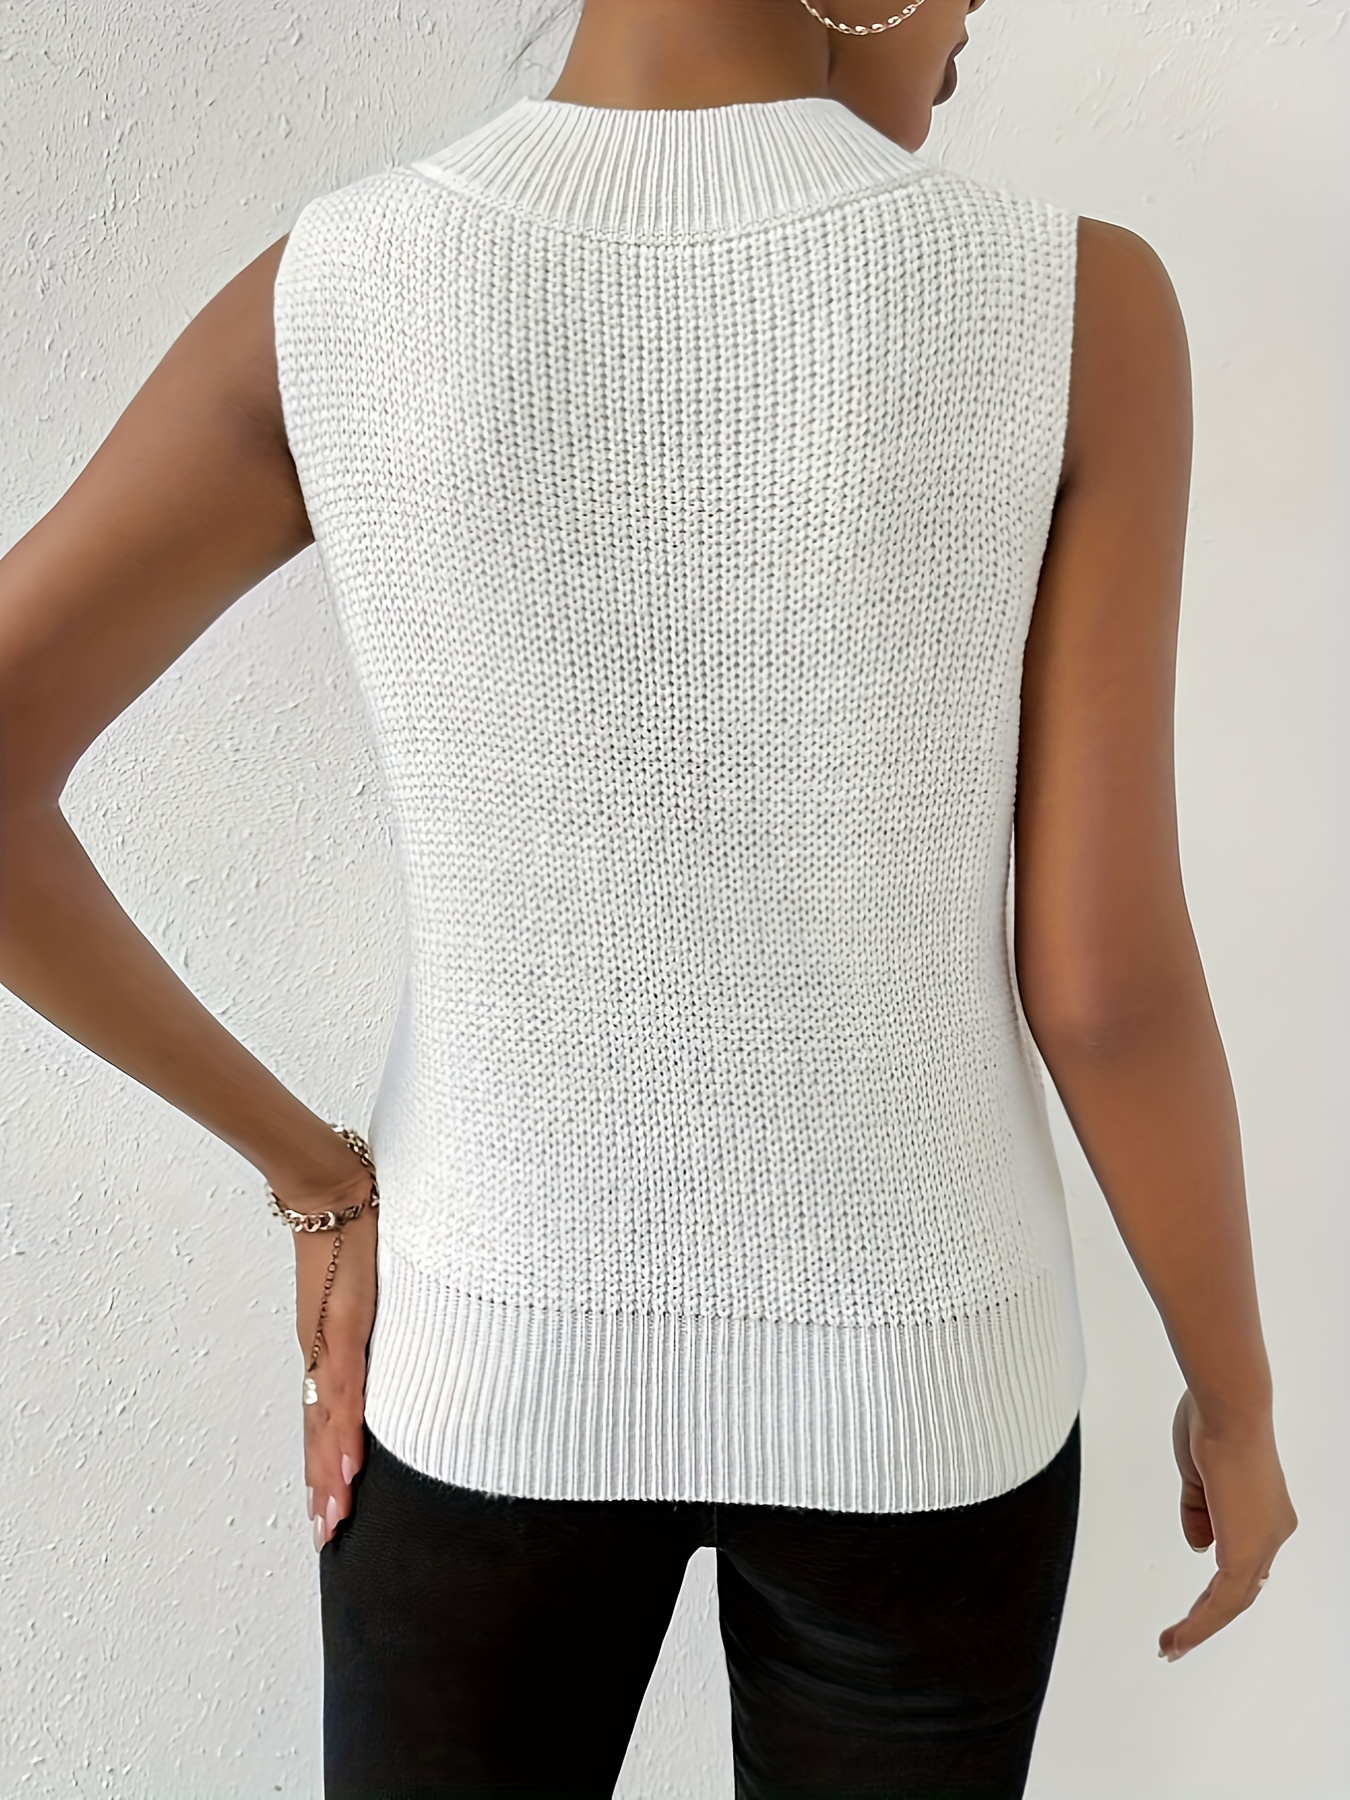 pointelle knit mock neck tank top casual sleeveless knit tank top womens clothing